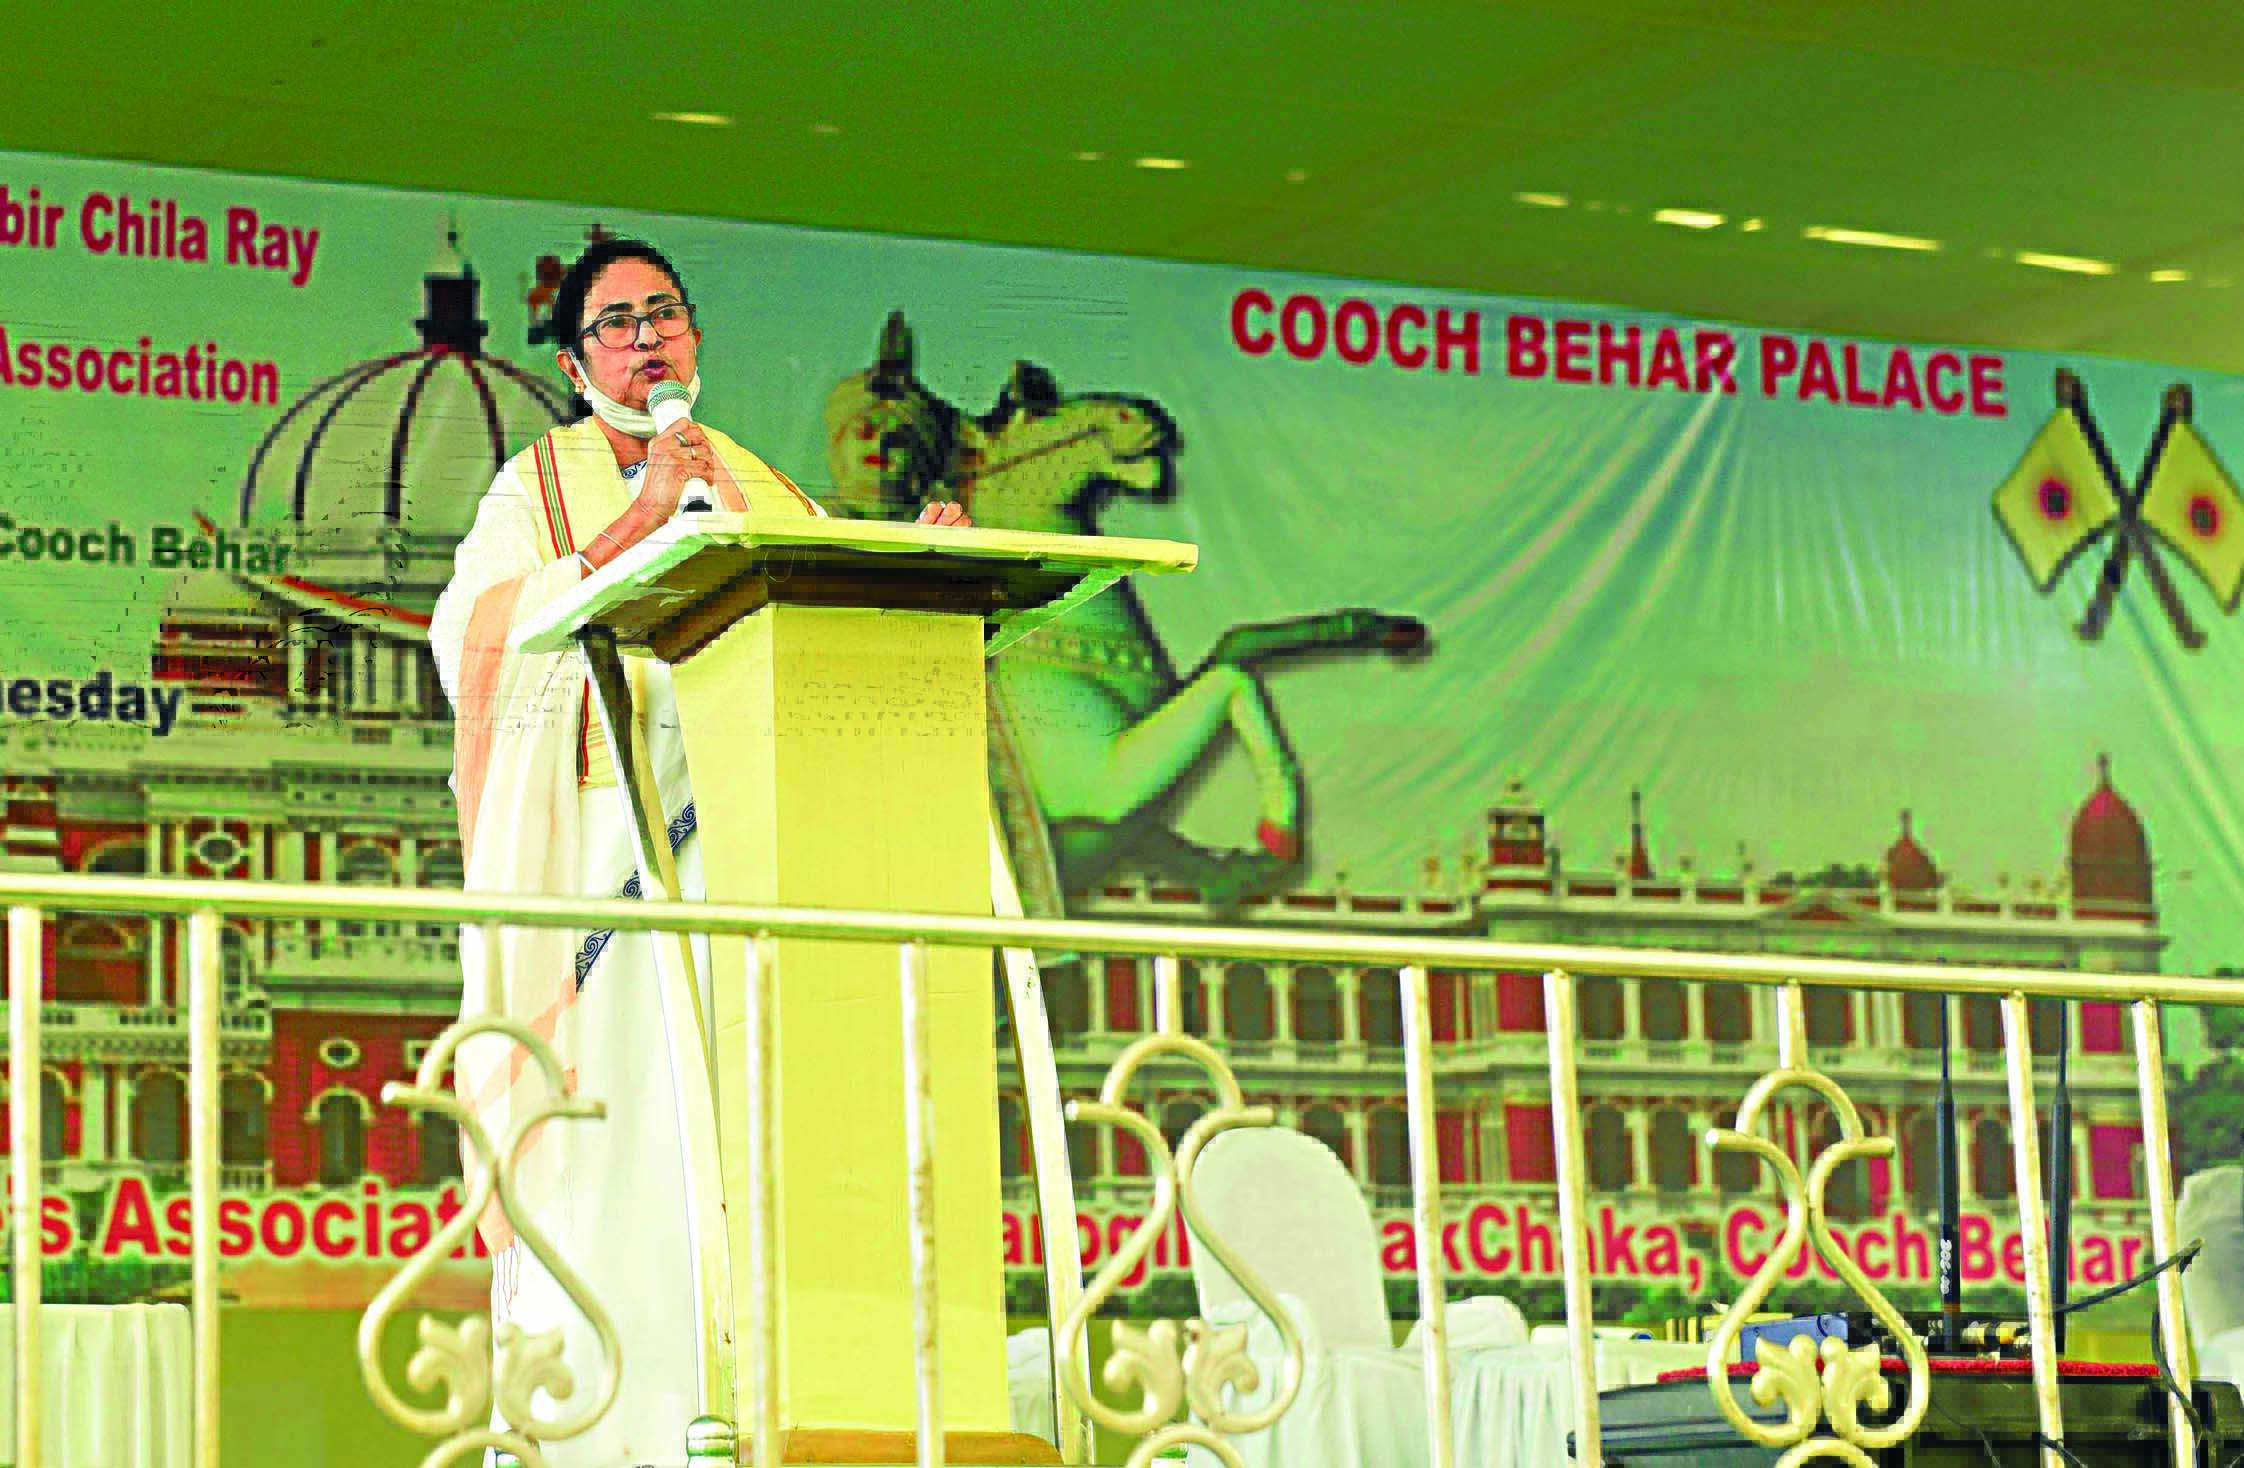 In days to come, North Bengal will see never-seen-before development